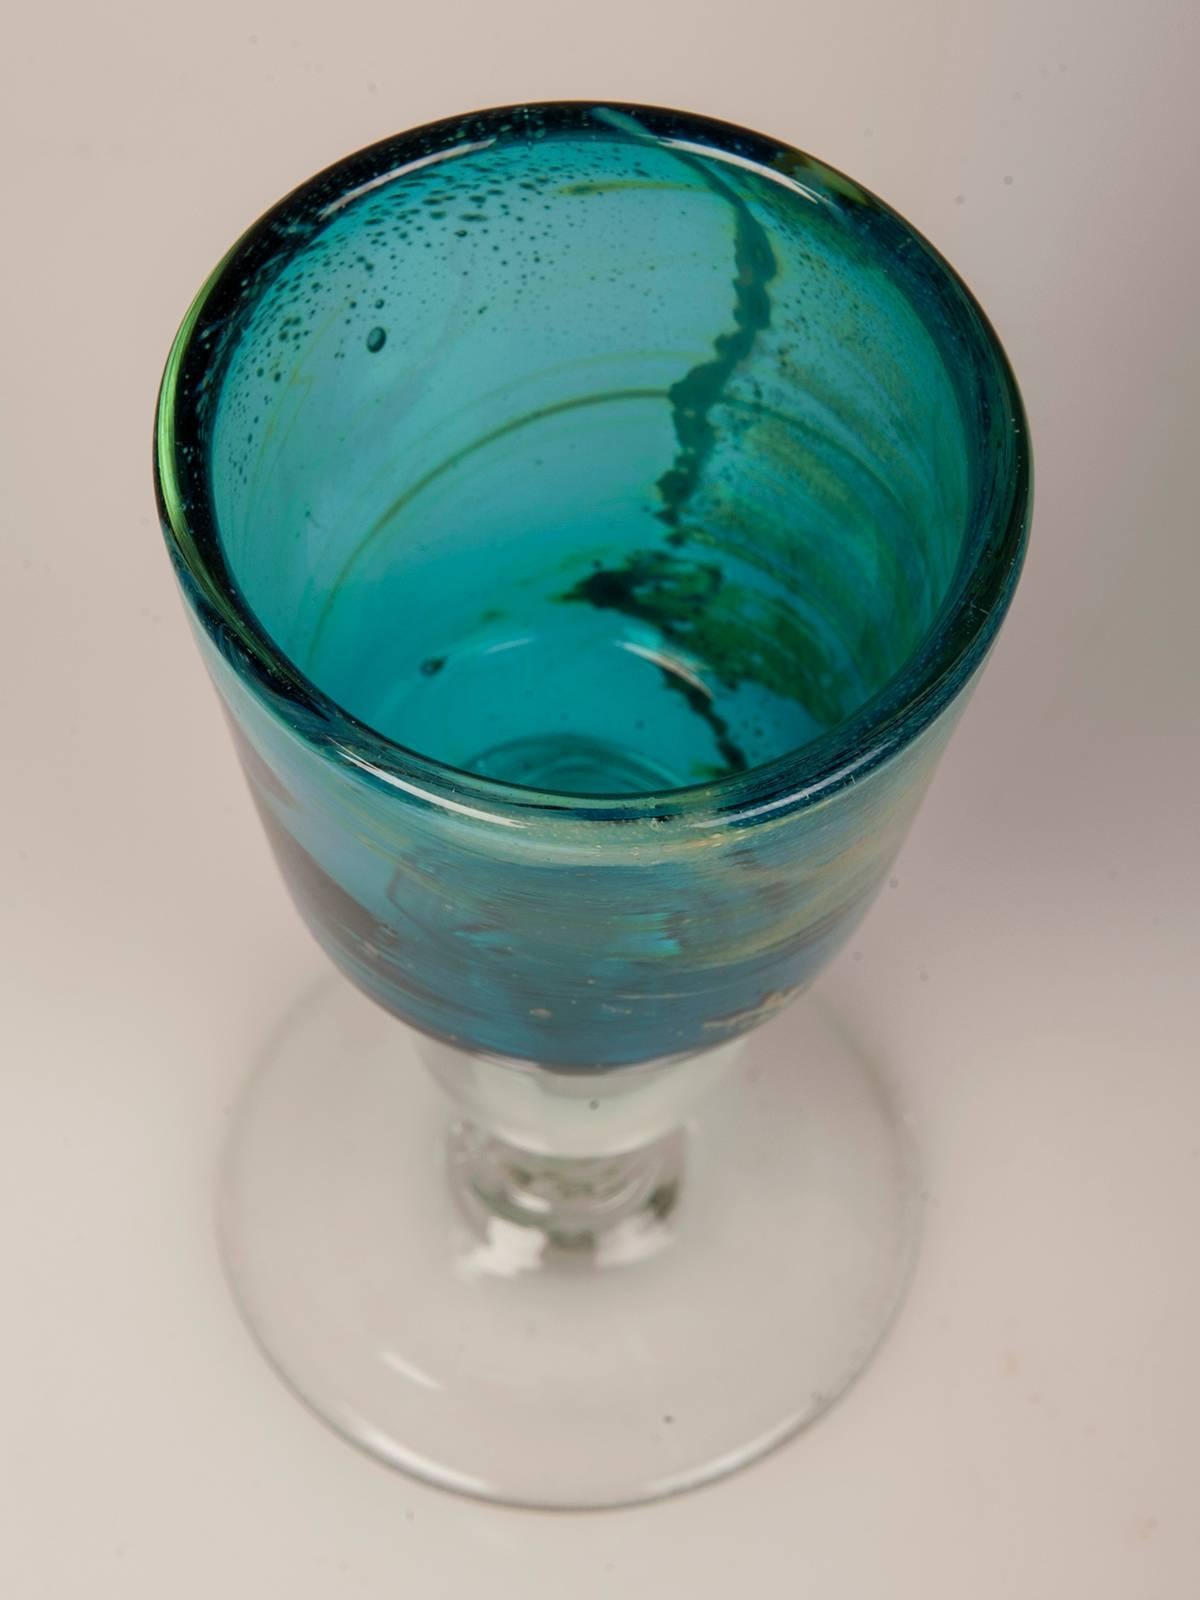 Be the first to see our new arrivals directly through 1stdibs! Please click follow dealer below. 

A circular goblet featuring the enchanting turquoise color of handblown Mdina Glass from Malta, circa 1975. Designed and made by Englishman Michael